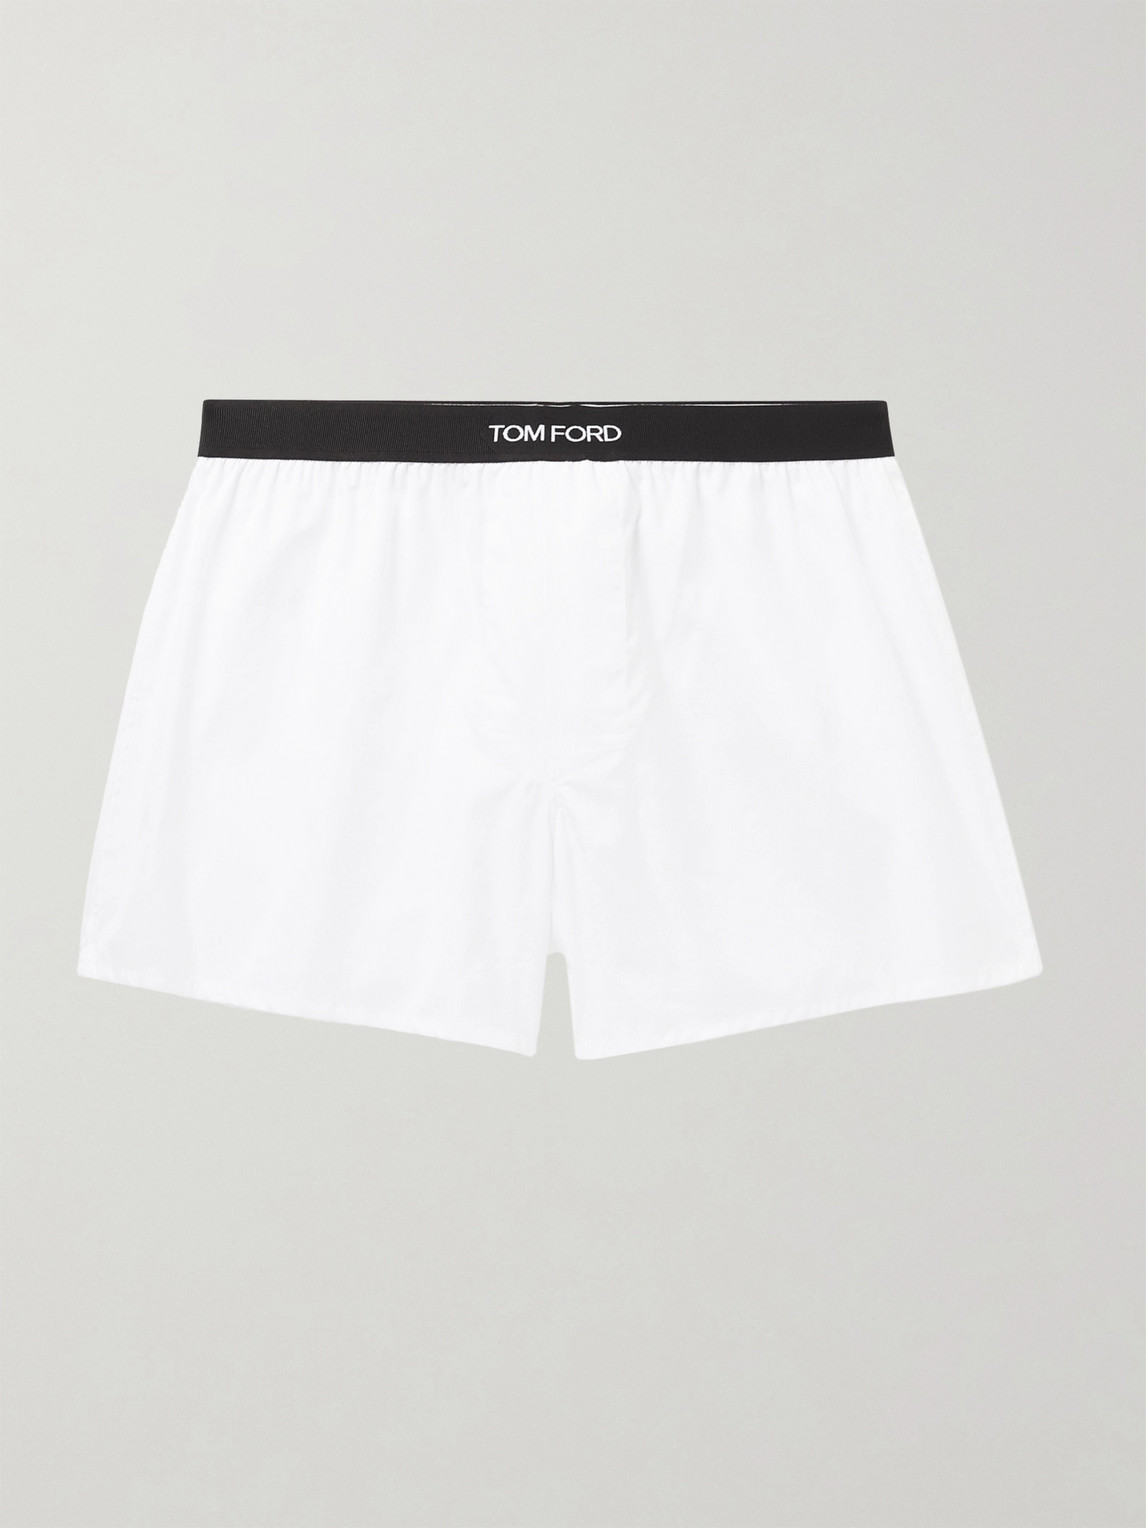 TOM FORD COTTON BOXER SHORTS